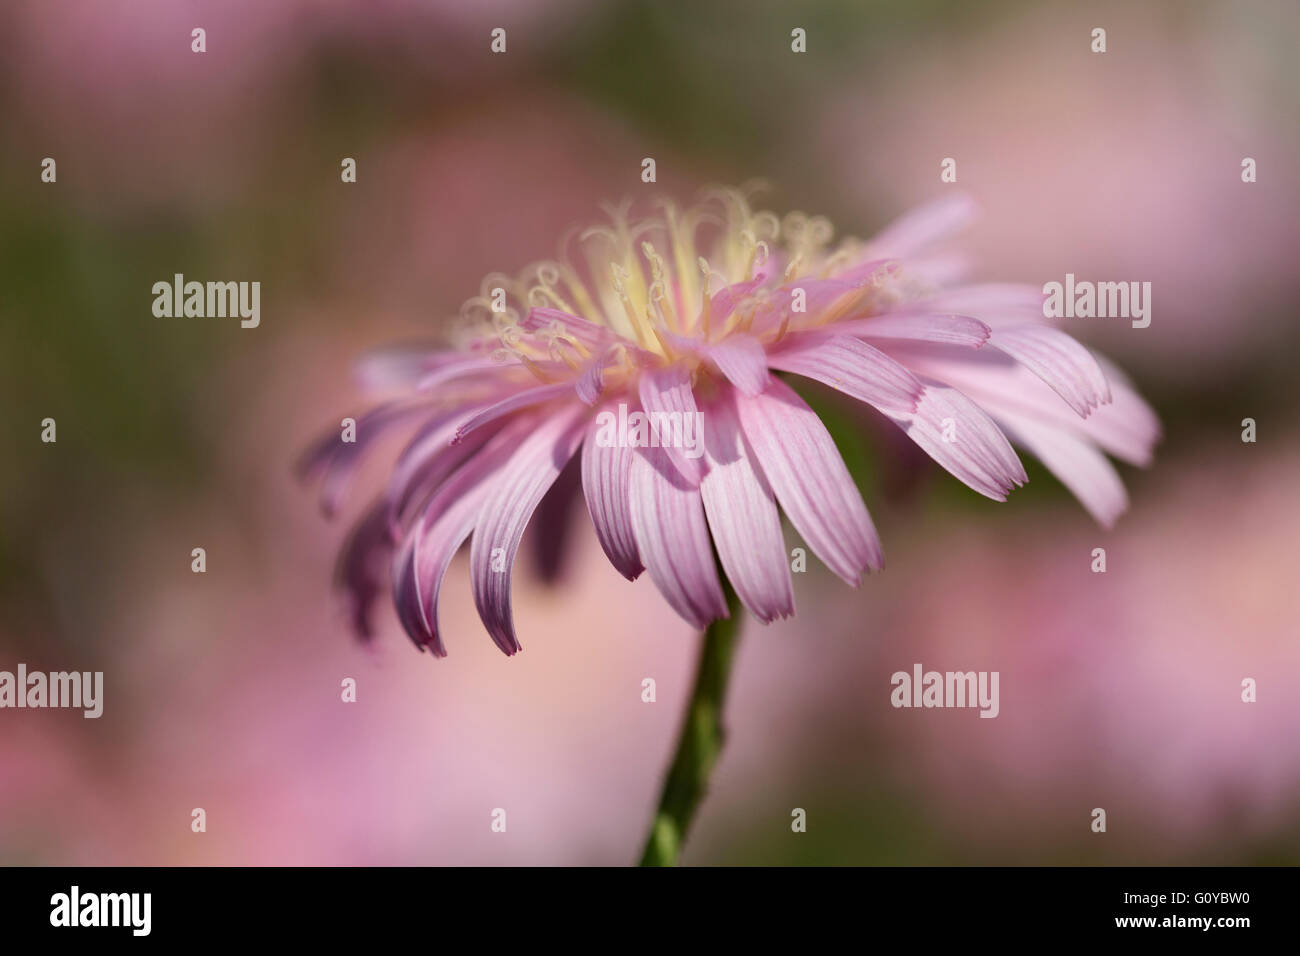 Pink dandelion, Crepis, Crepis incana, Beauty in Nature, Colour, Contemporary, Creative, Deciduous, Dreamlike, Flower, Autumn Flowering, Summer Flowering, Frost hardy, Greece Indigenous, Growing, Outdoor, Pastel Colour, Perennial, Plant, Stamen, Pink, Stock Photo